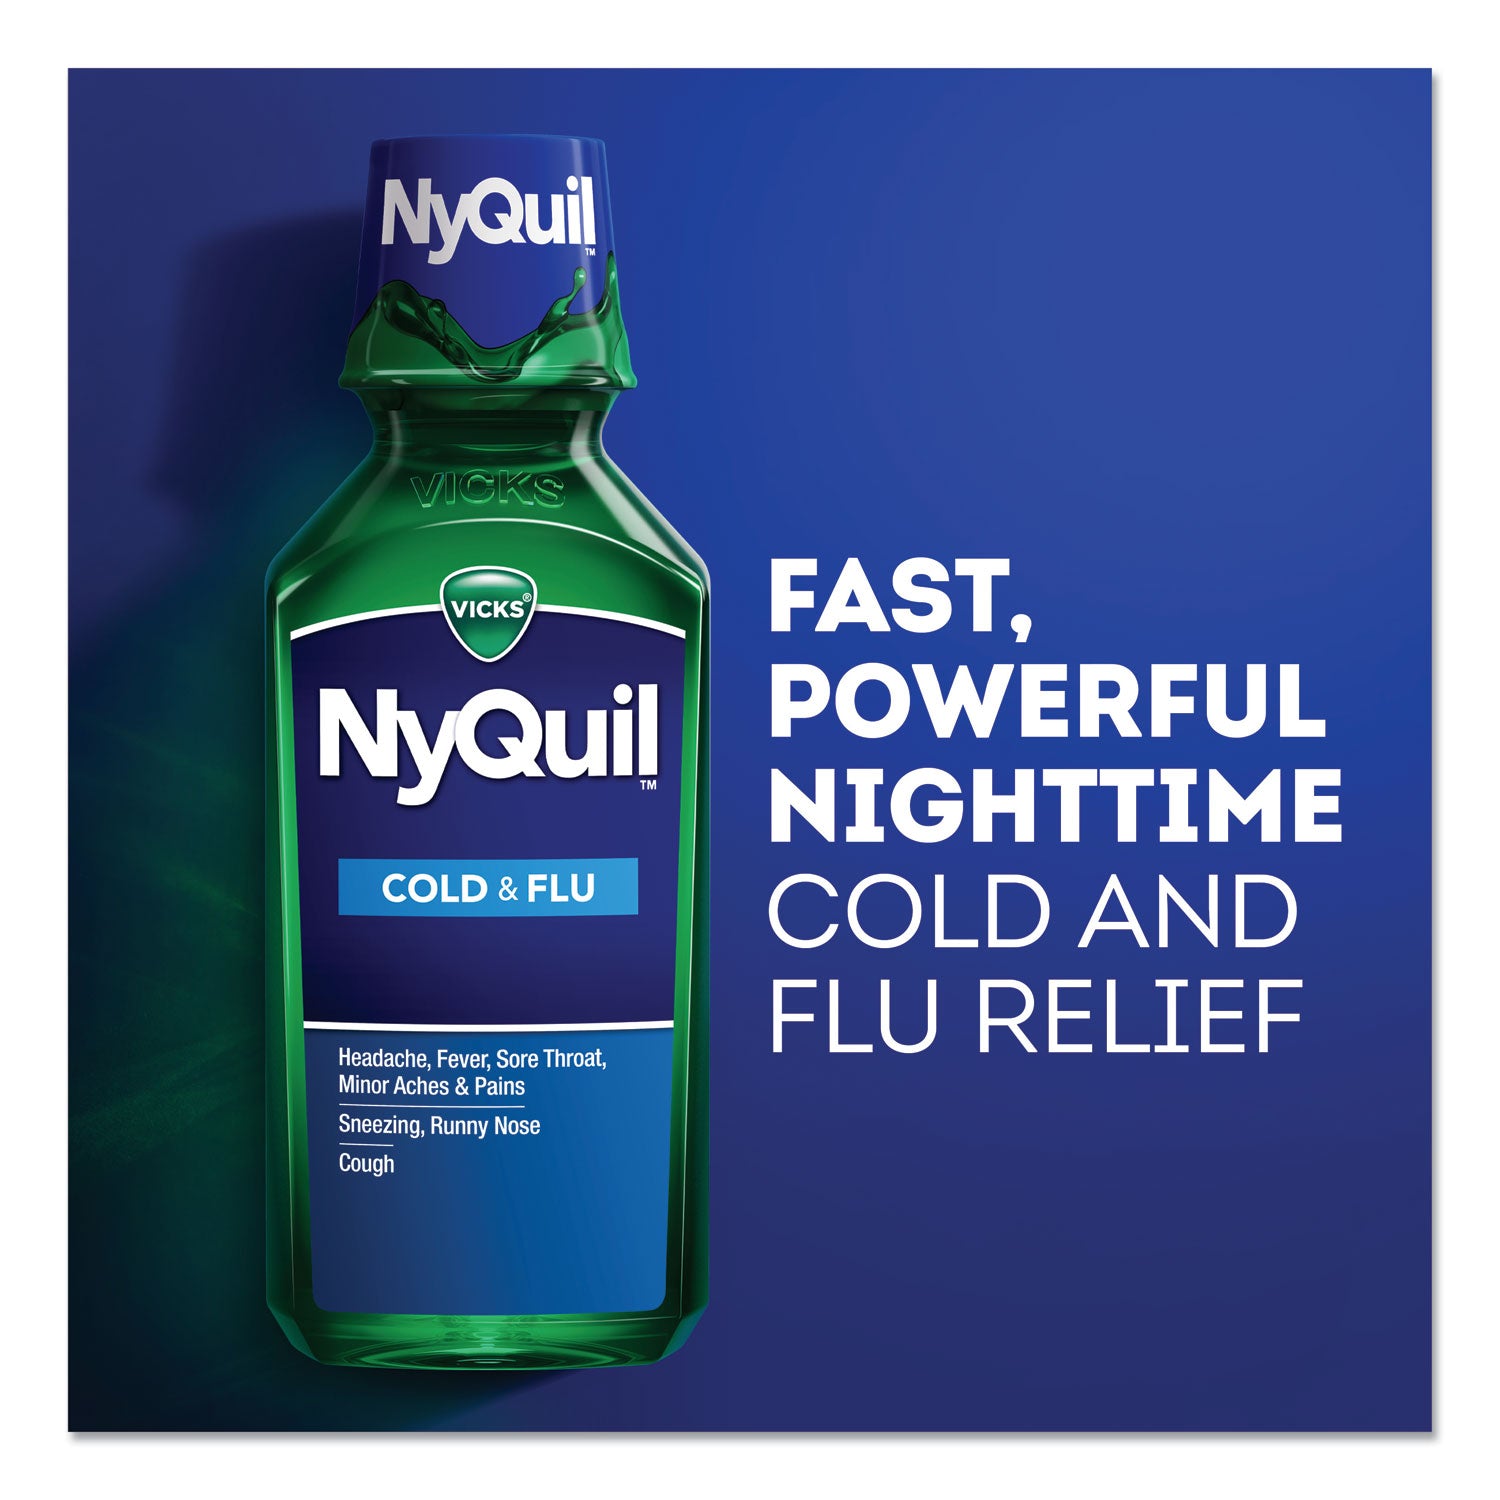 nyquil-cold-and-flu-nighttime-liquid-12-oz-bottle_pgc01426ea - 4